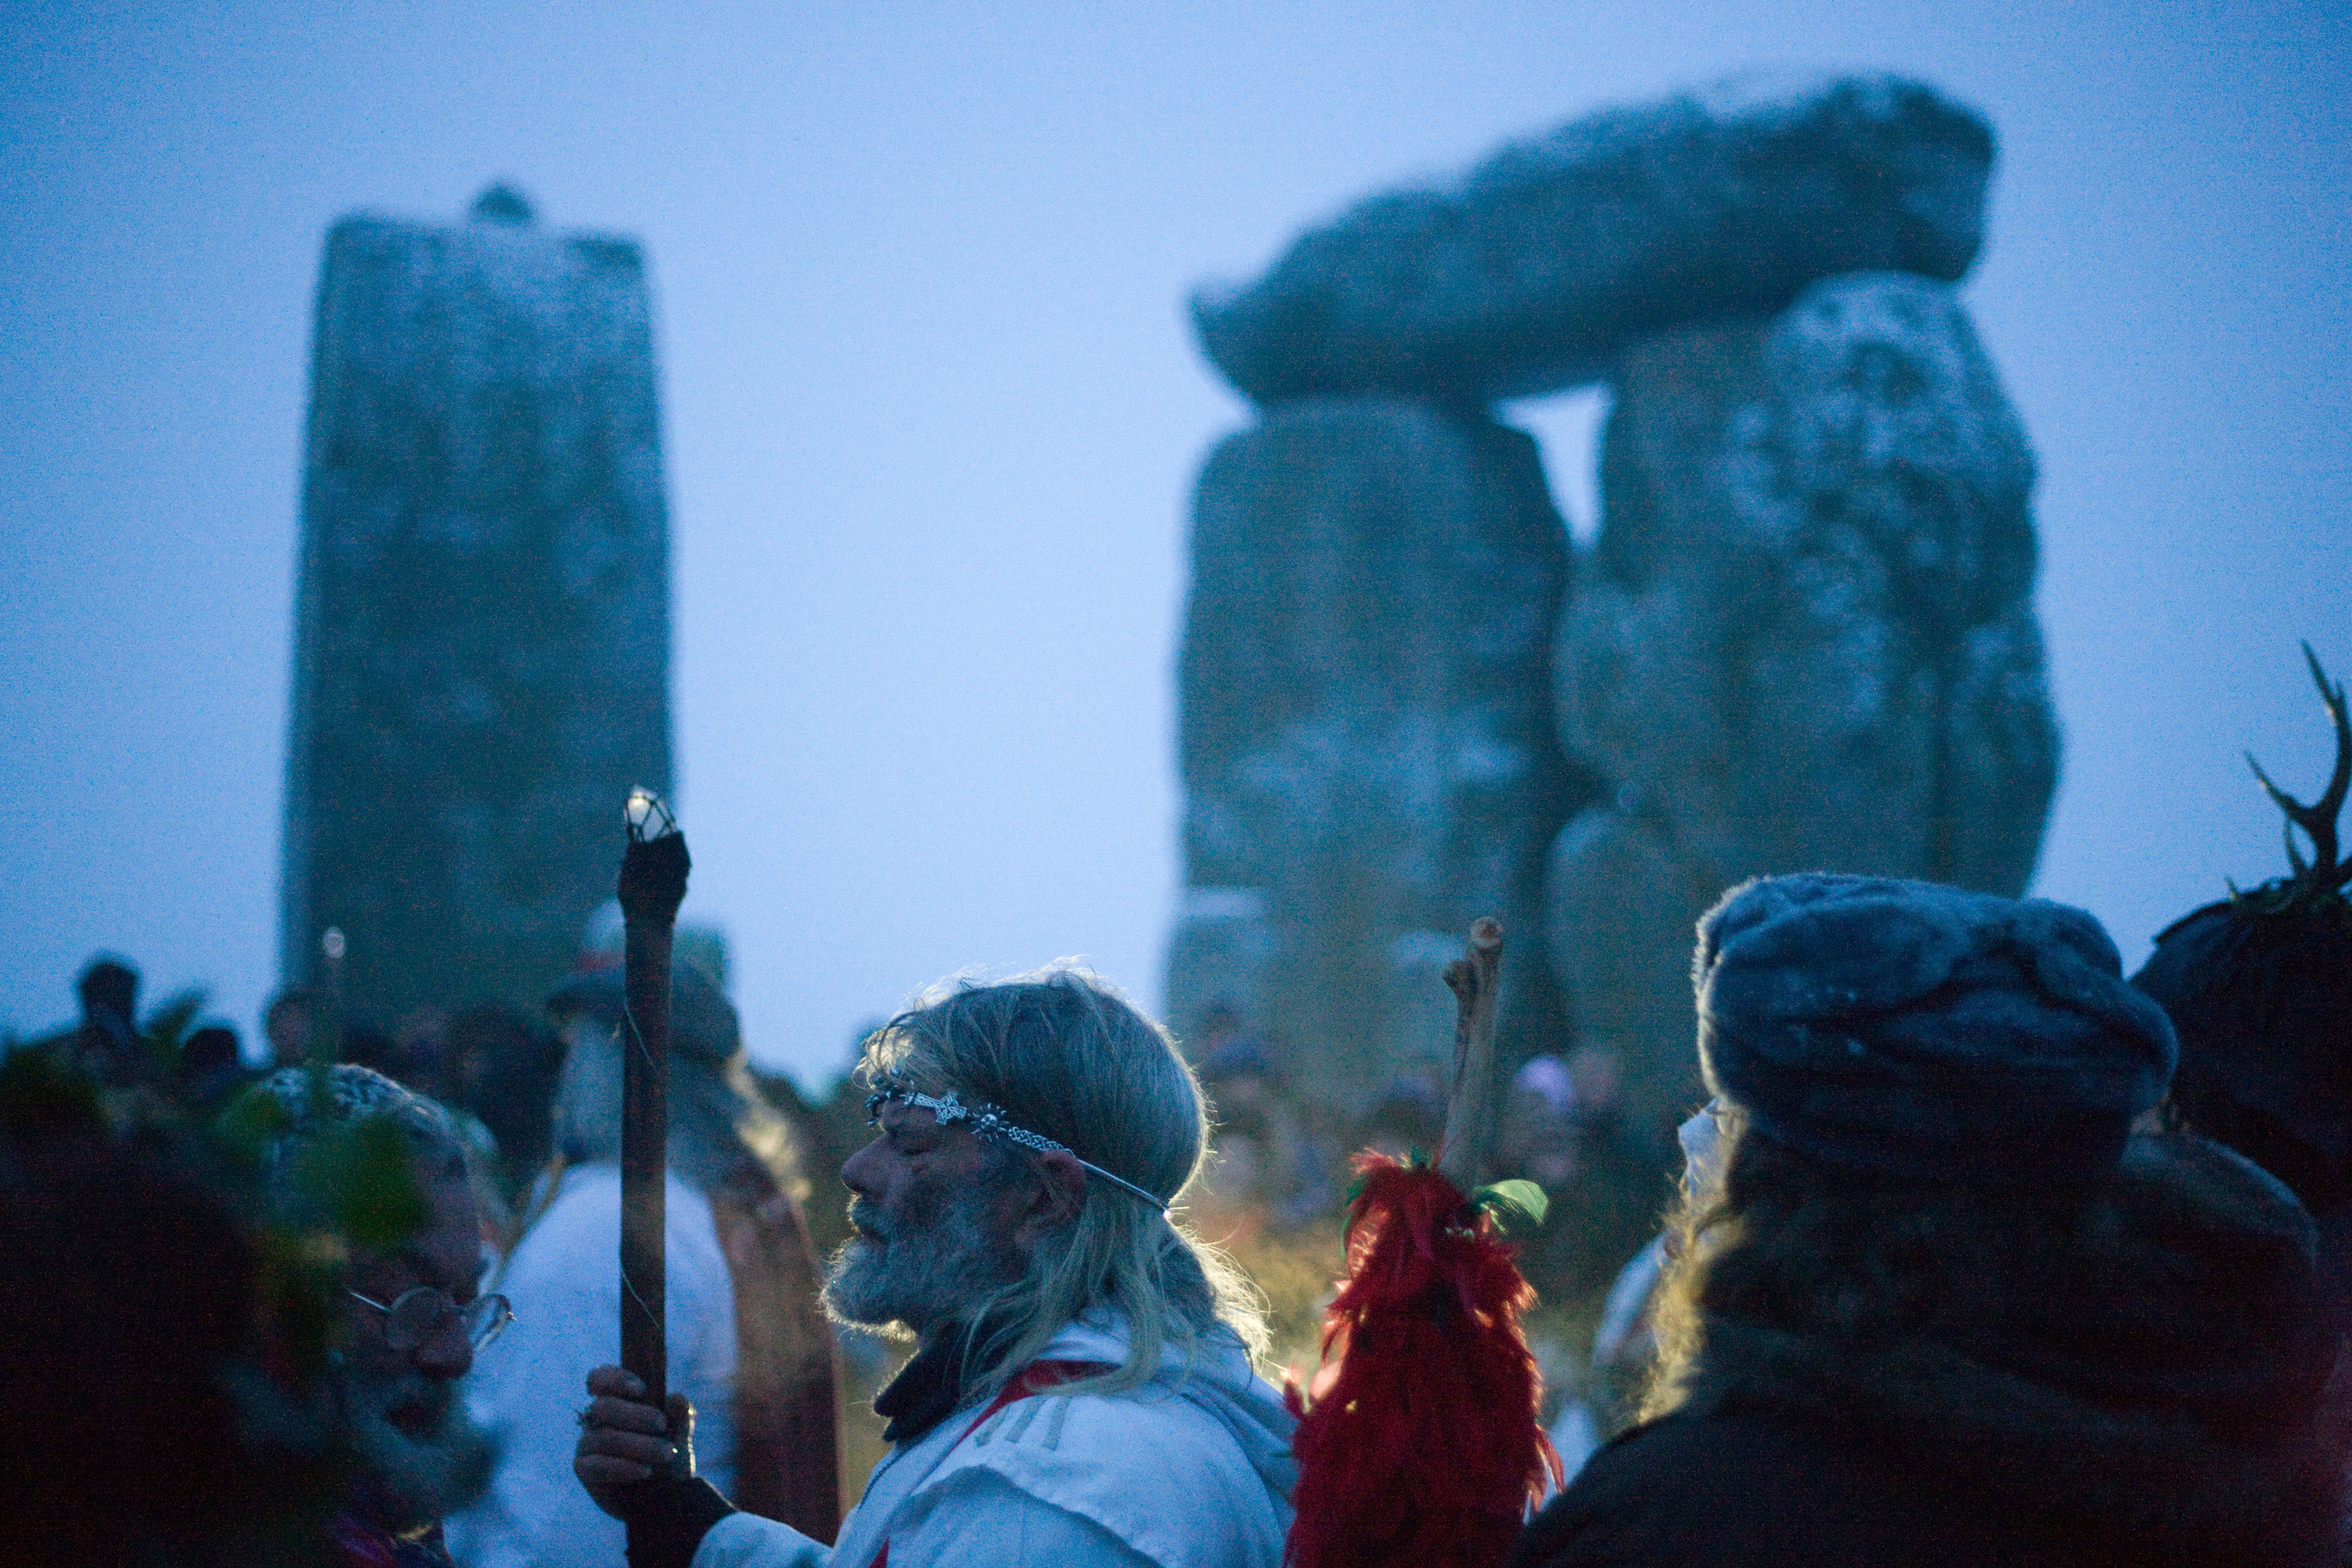 Druid ceremony during the winter solstice at Stonehenge